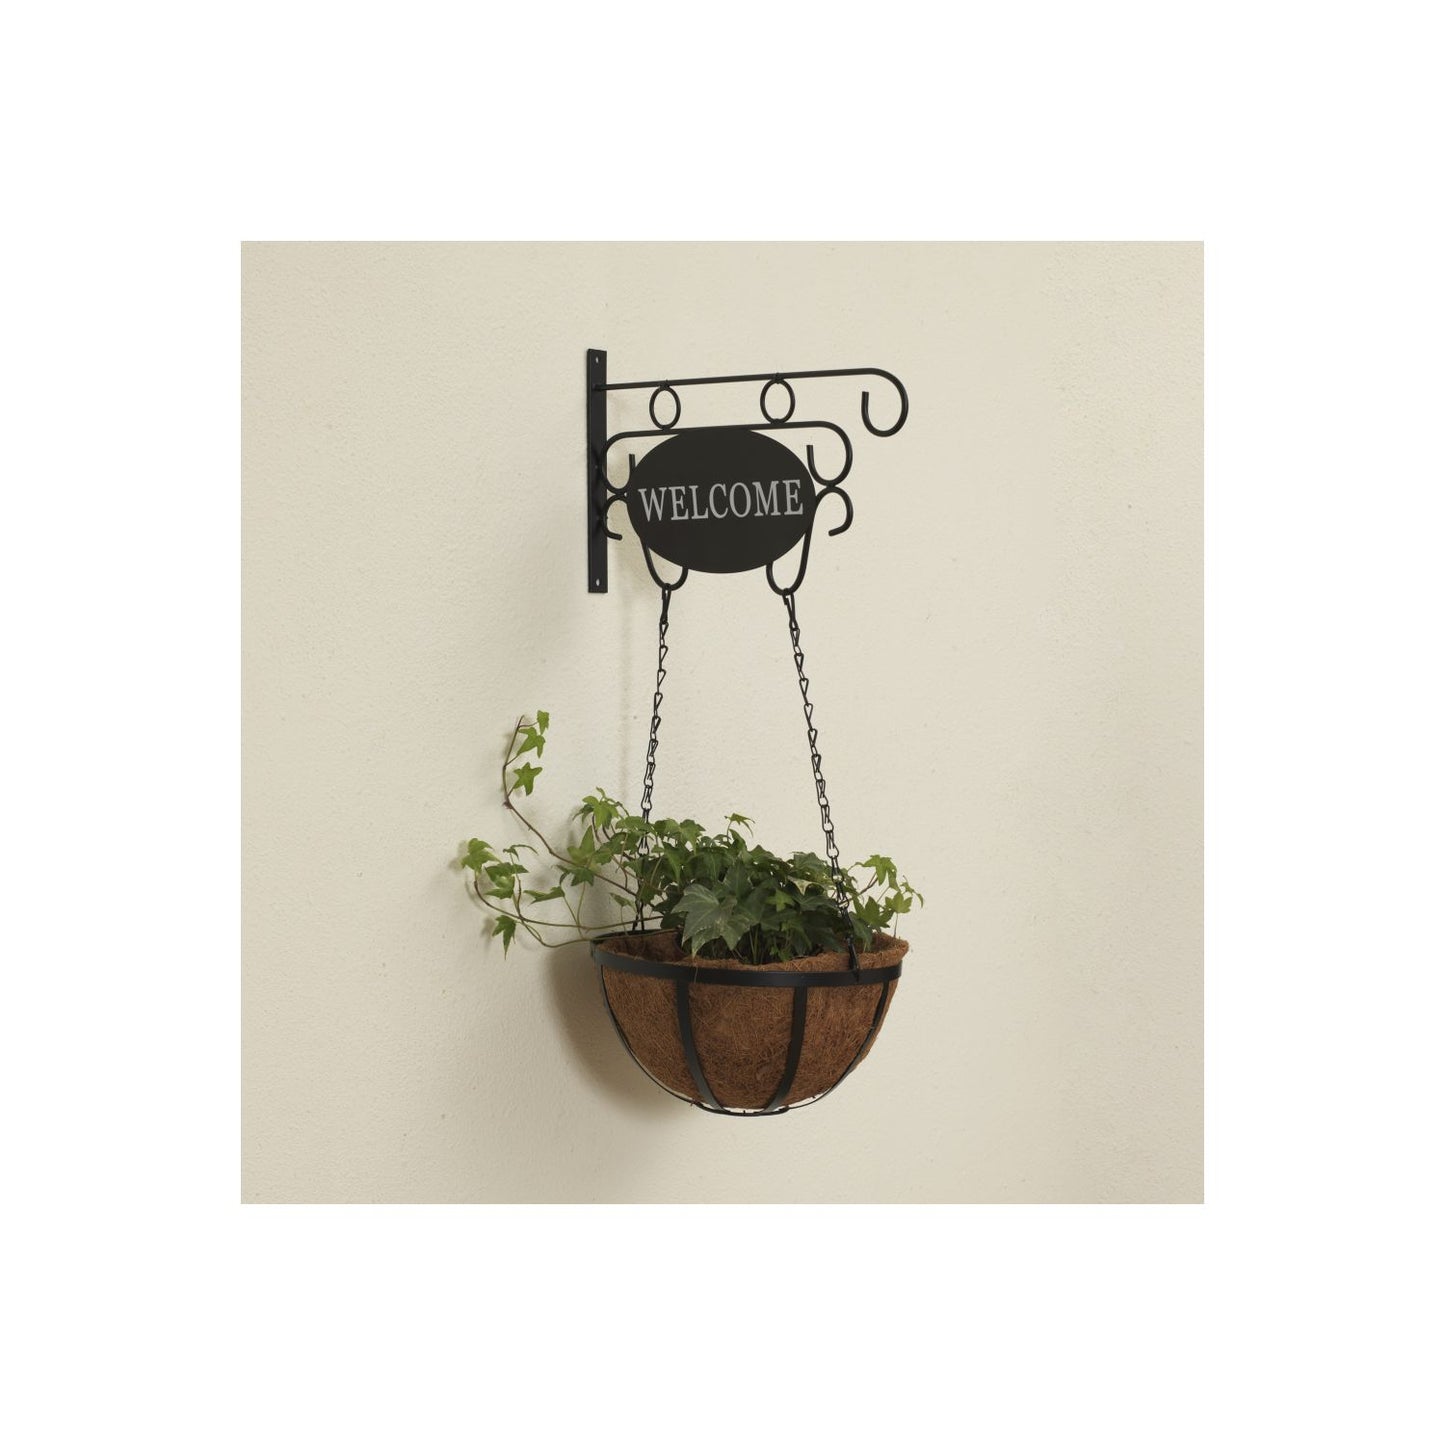 Gerson Company 10"D Coco Hanging Basket W/ Welcome Hook